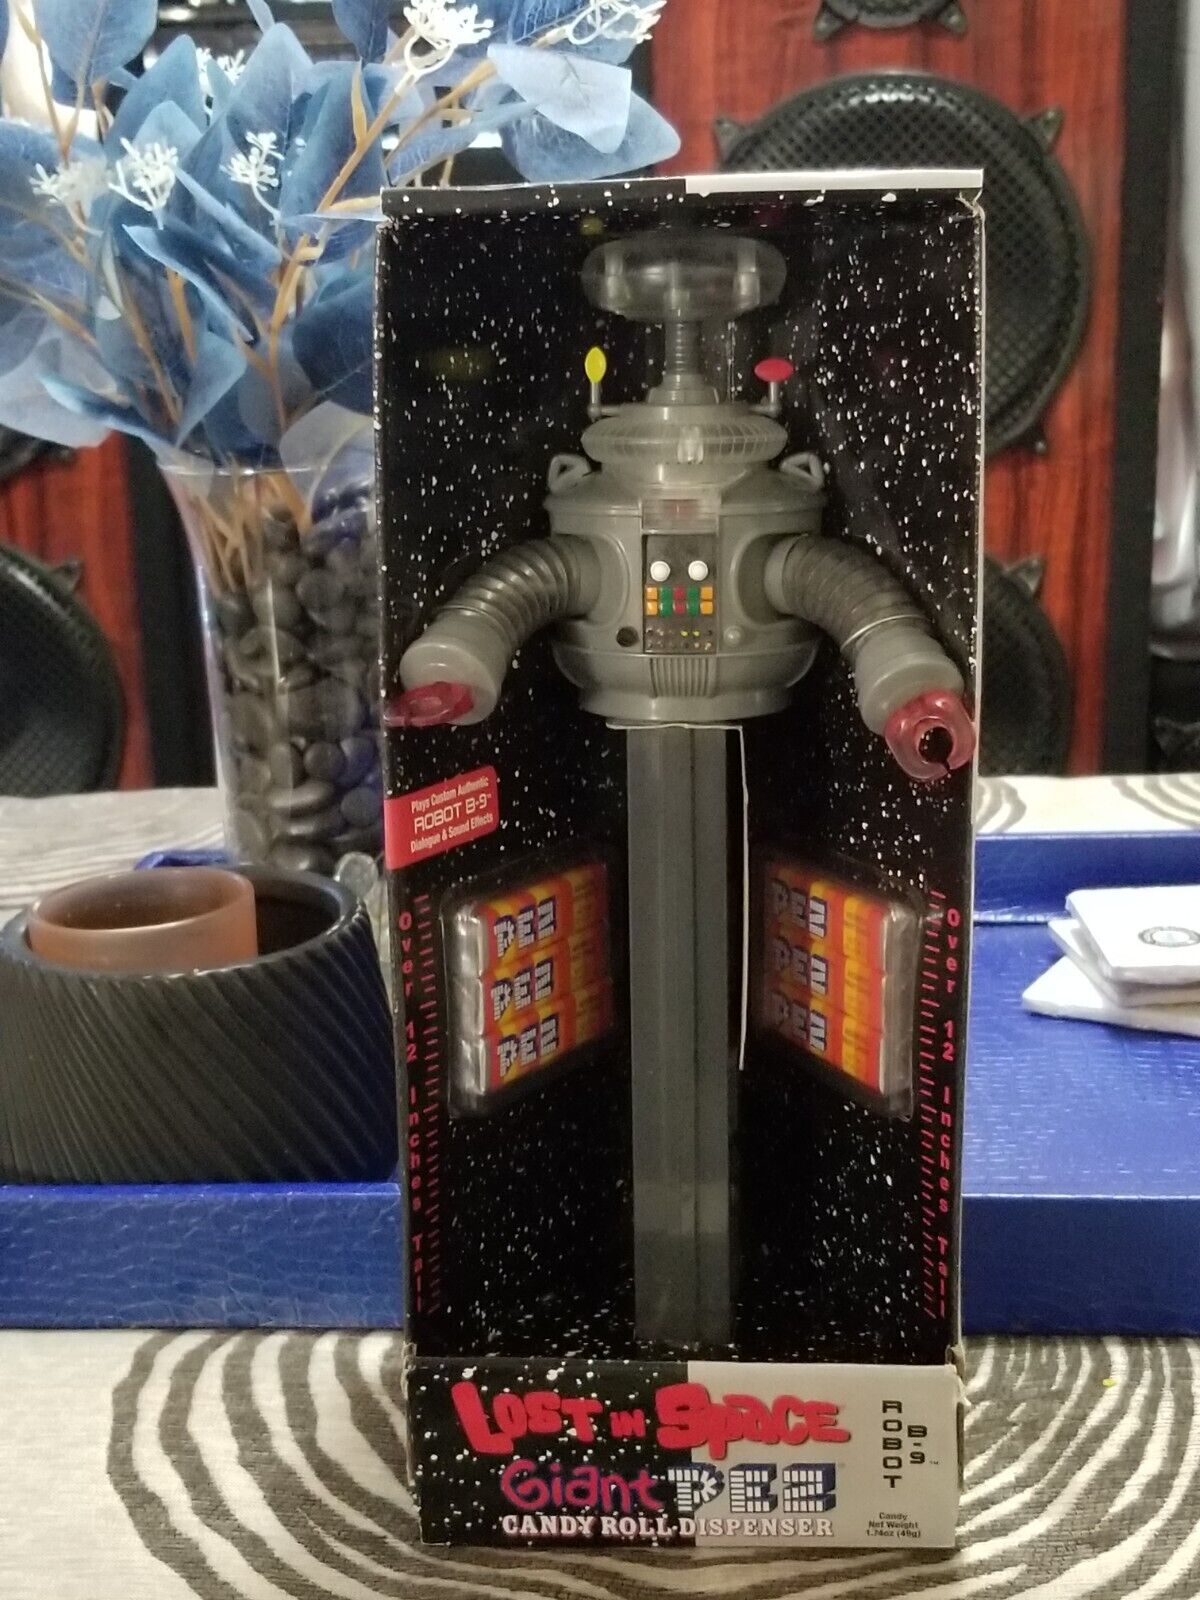 LOST In SPACE ROBOT B9 Giant PEZ Candy Dispenser 12